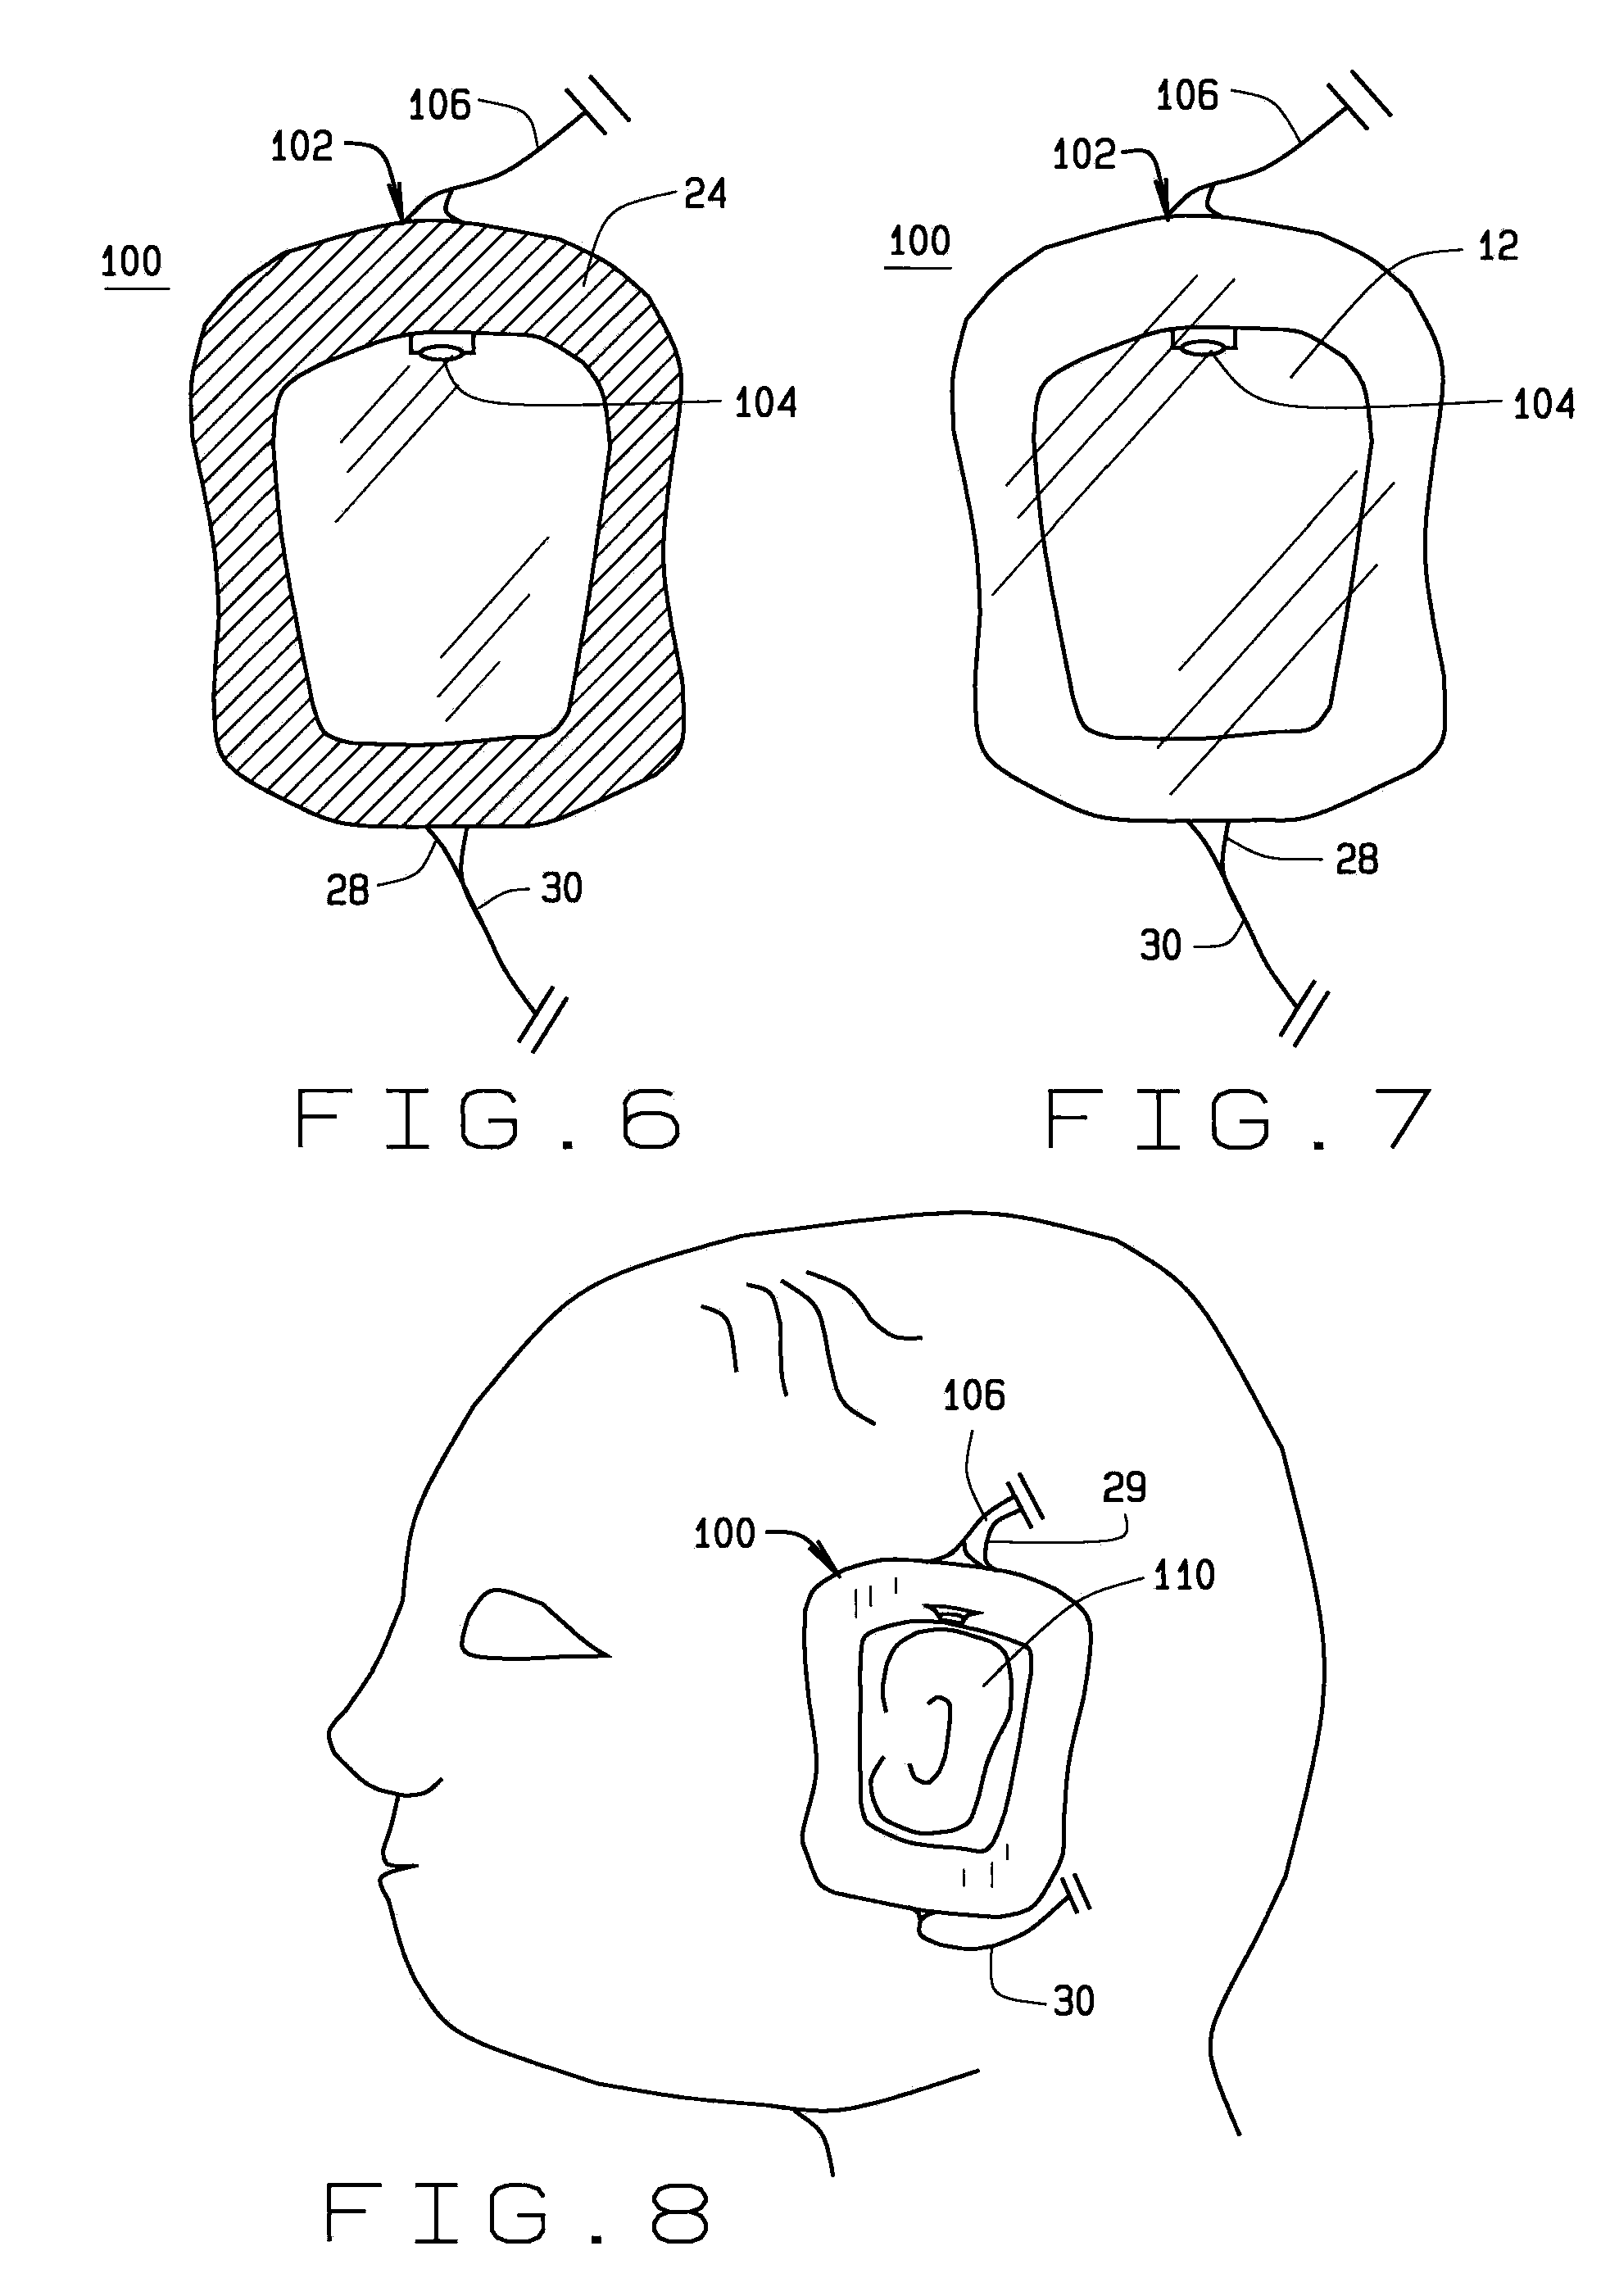 Apparatus for evoking and recording bio-potentials